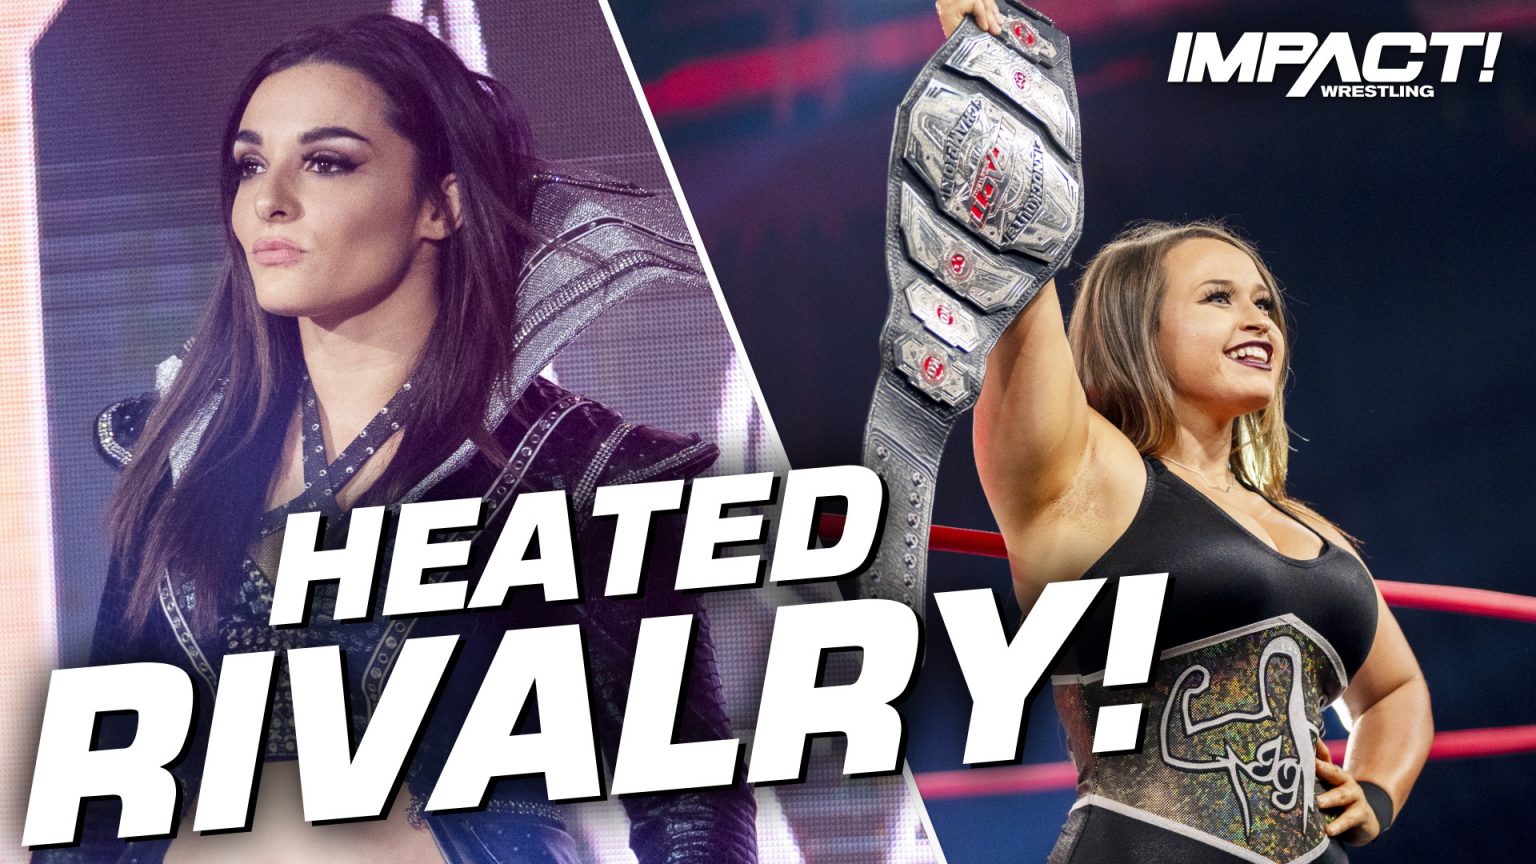 Deonna Purrazzo And Jordynne Grace Battle For Knockouts Title At Slammiversary Impact Wrestling